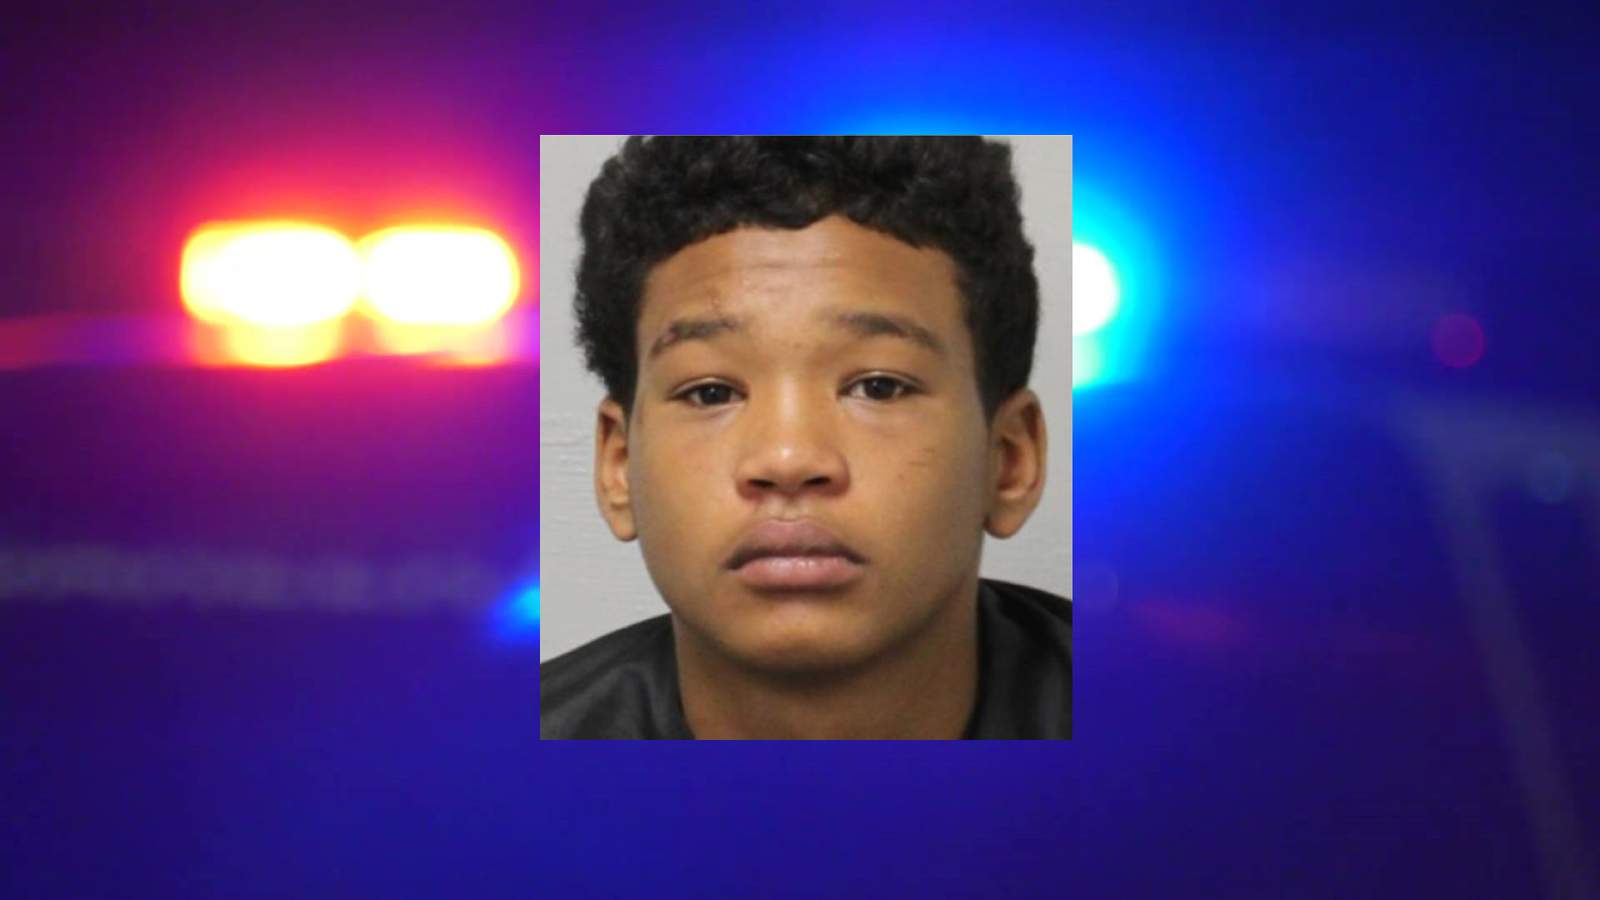 Teen who pulled gun in fight charged with murder, police say